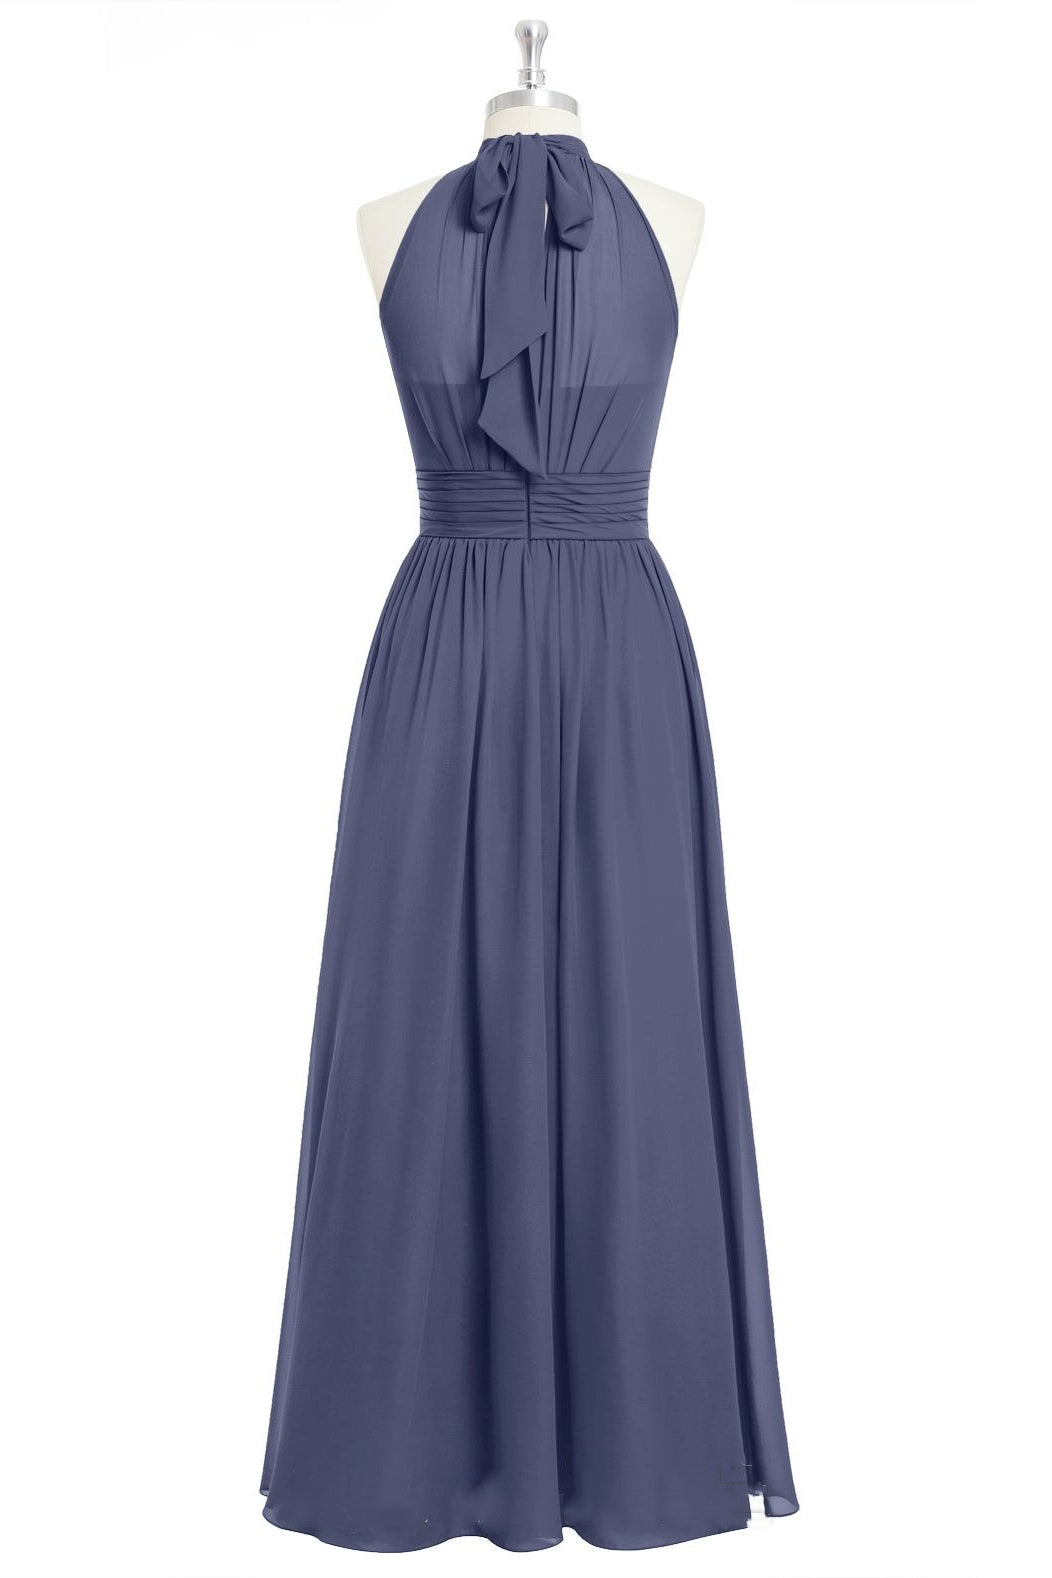 Navy Blue Halter Bow Tie A-line Chiffon Long Bridesmaid Dress with Slit